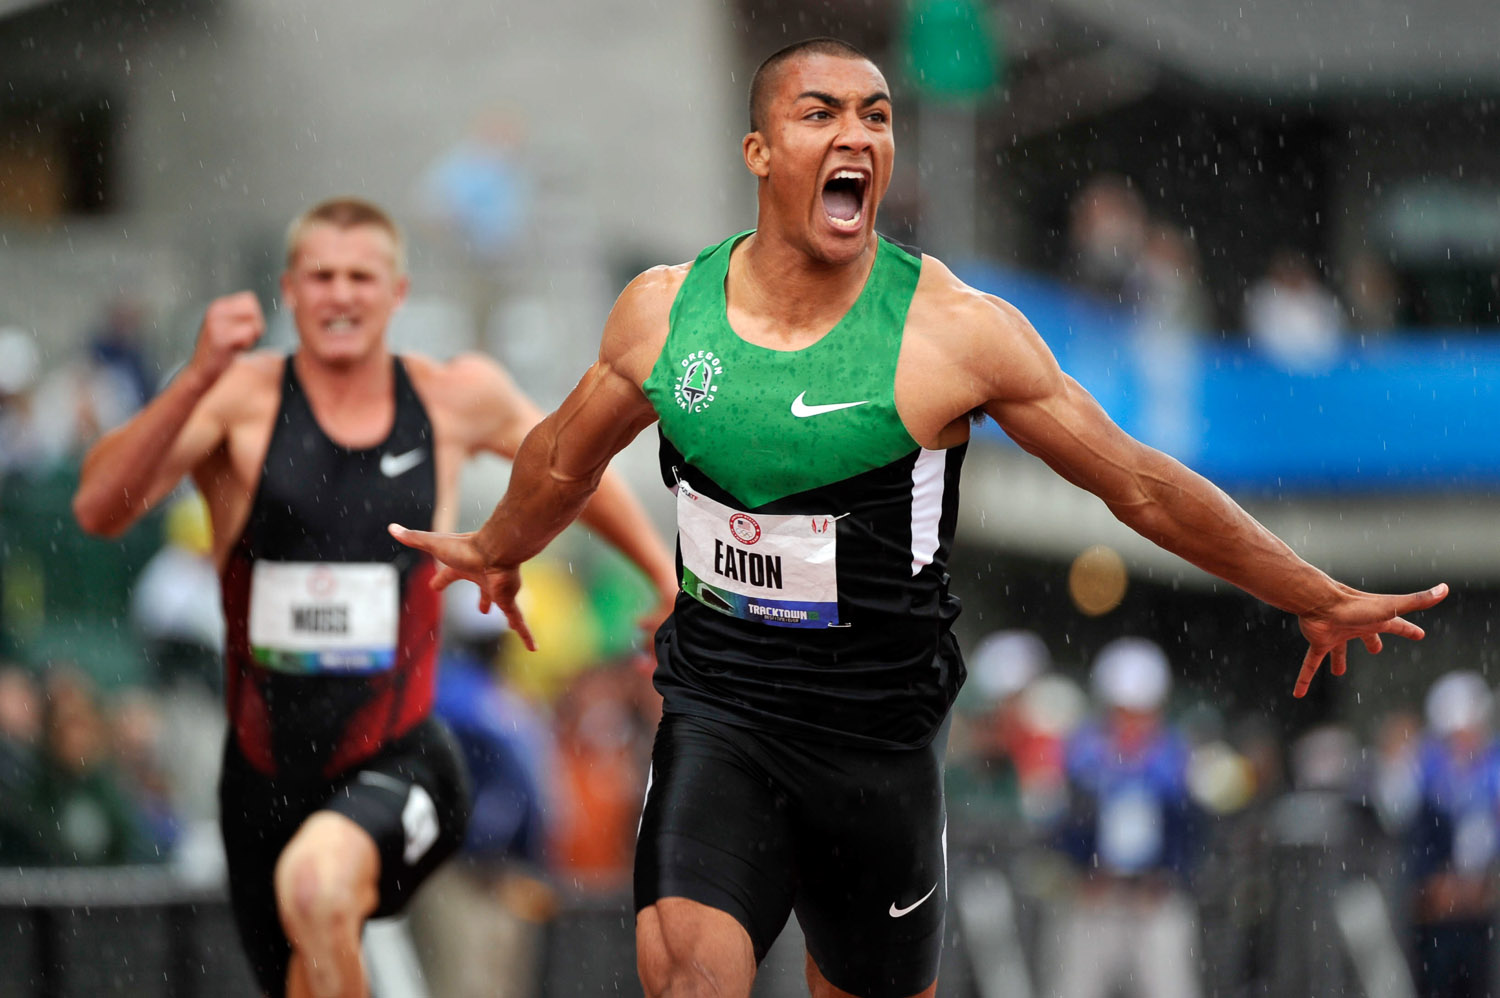 Ashton Eaton crosses the finish line setting a world record in the decathlon 100 meters with a time of 10.21. The event was the first of a record-shattering Olympic Trials.